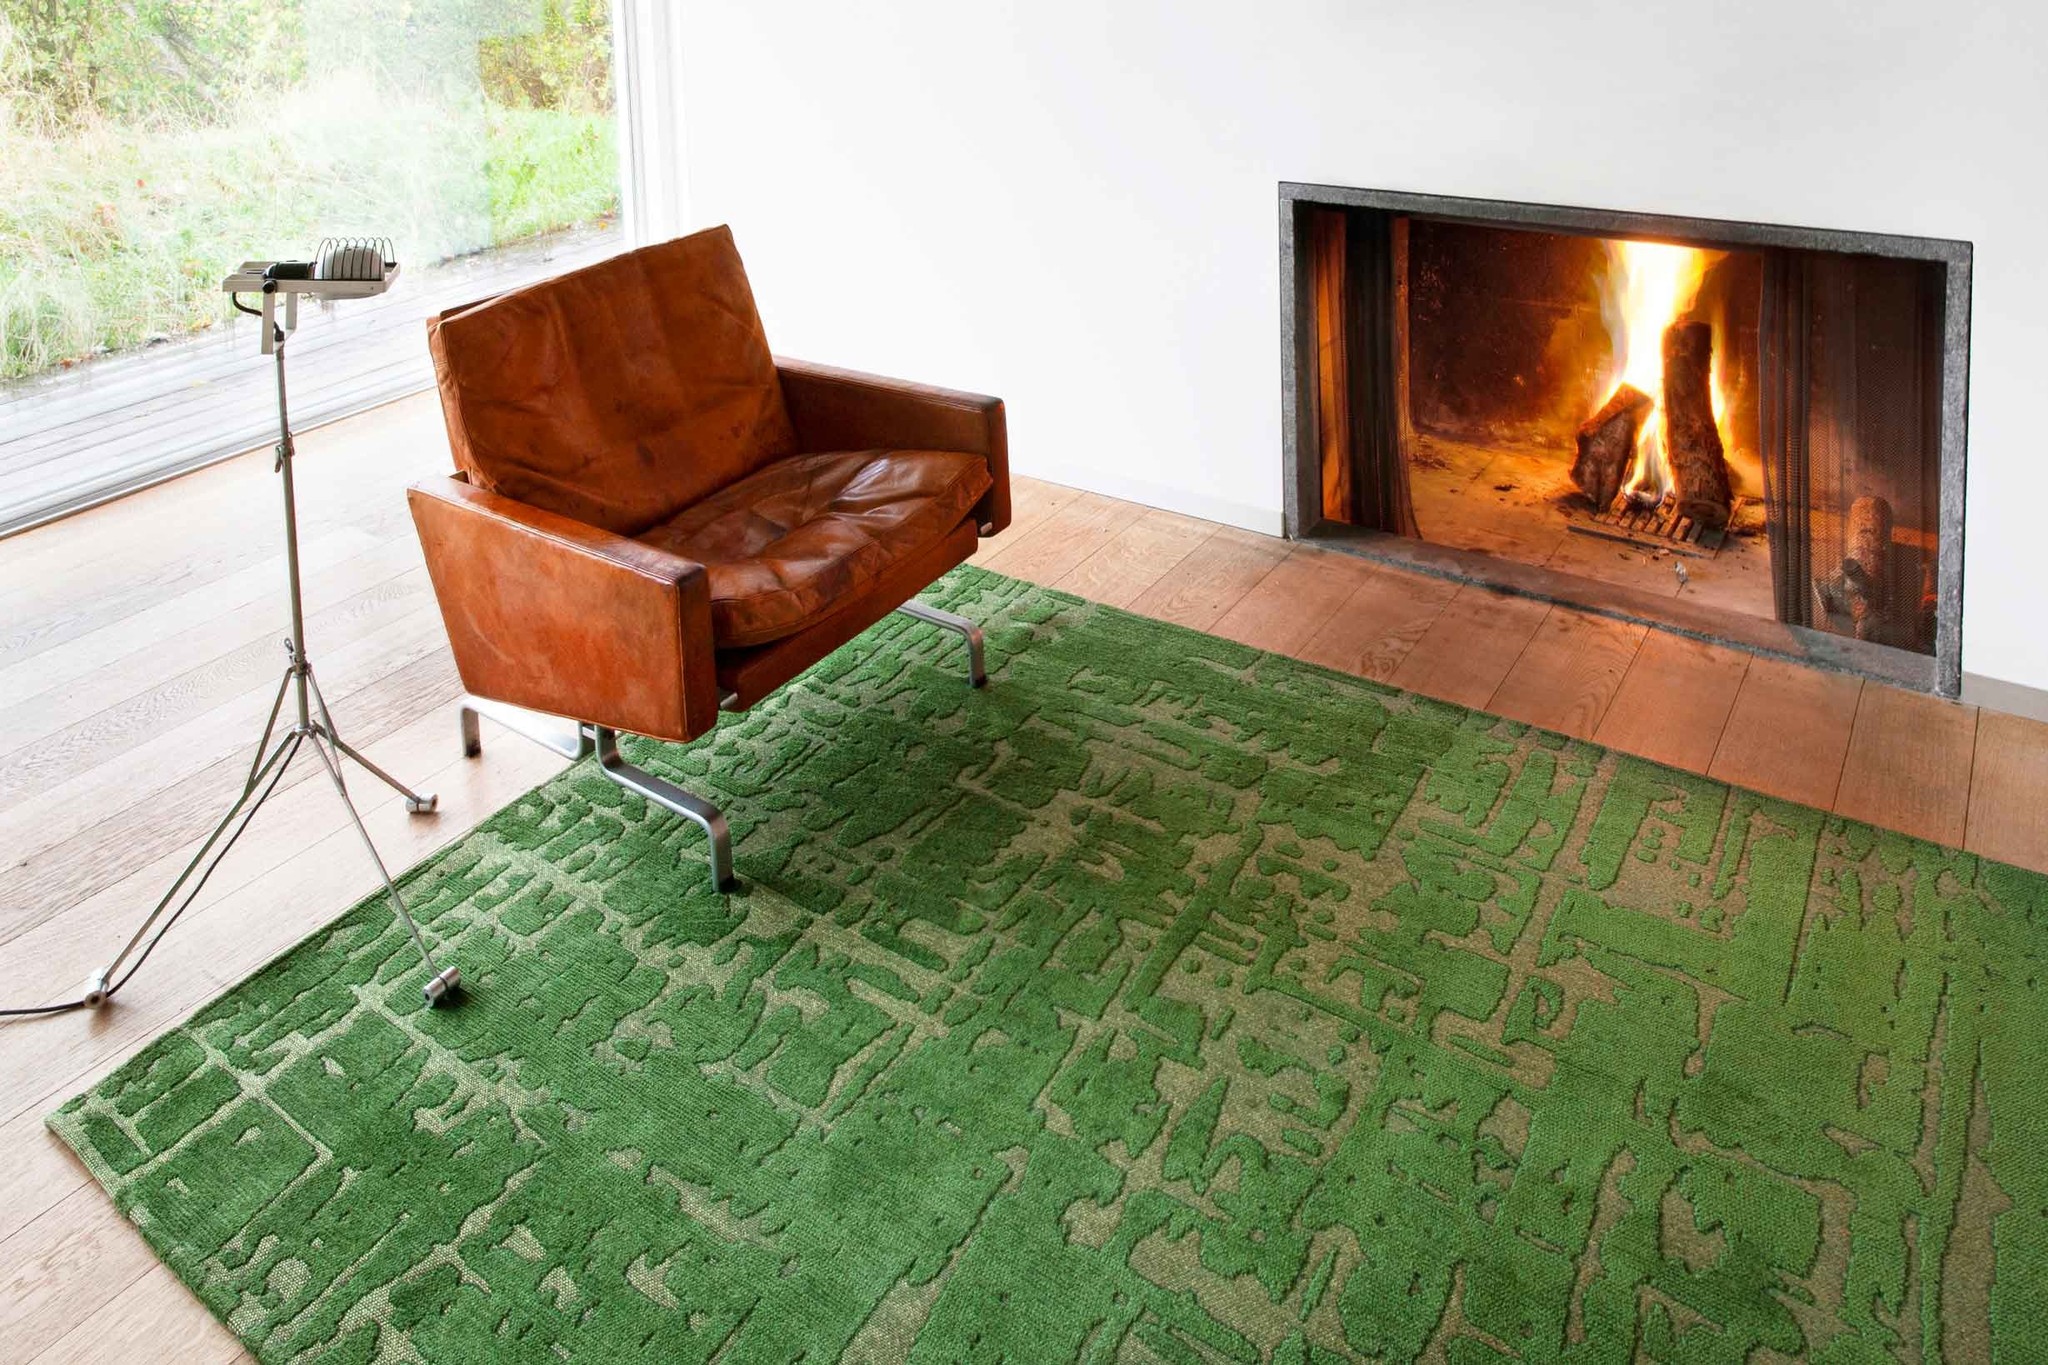 Abstract Green Belgian Rug ☞ Size: 5' 7" x 8' (170 x 240 cm)